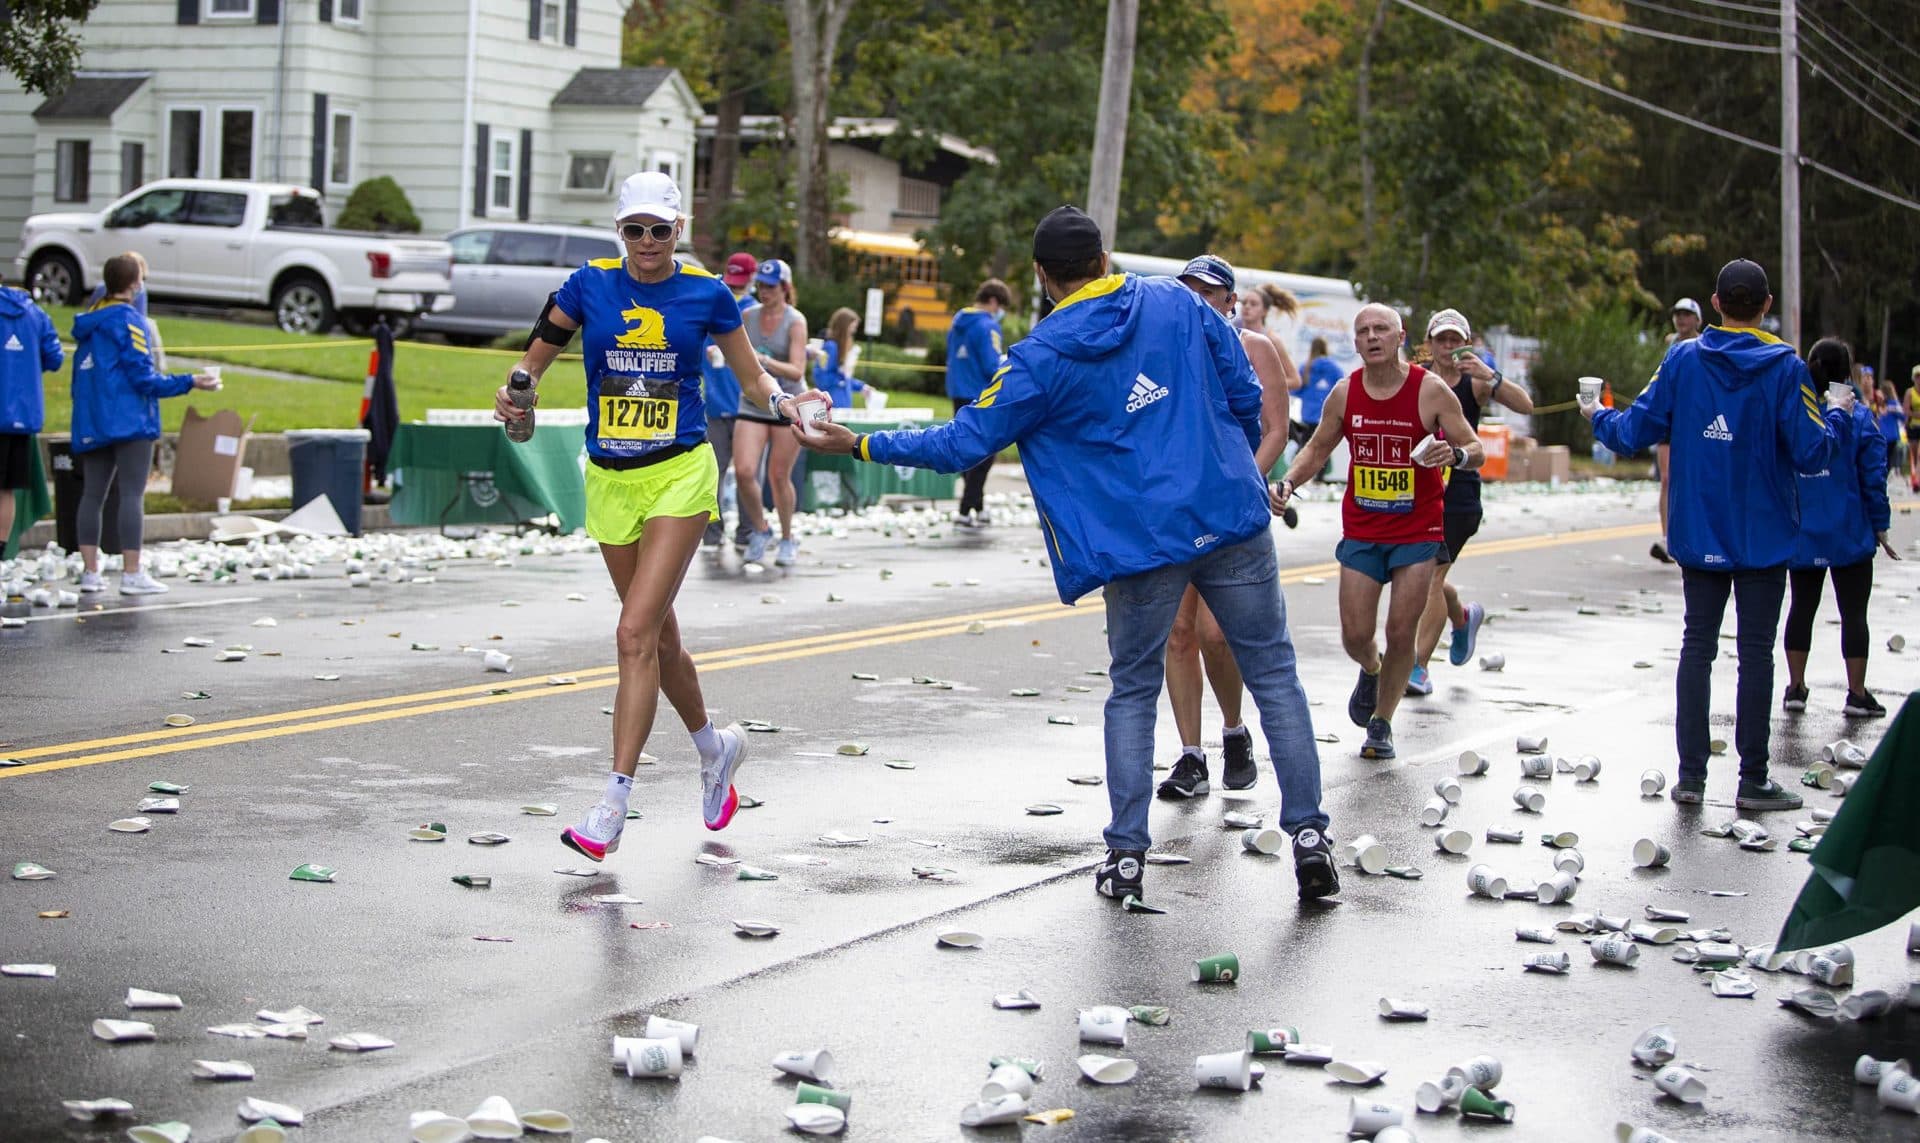 A runner takes a water cup from a volunteer at a marathon route water station in Newton. (Robin Lubbock/WBUR)